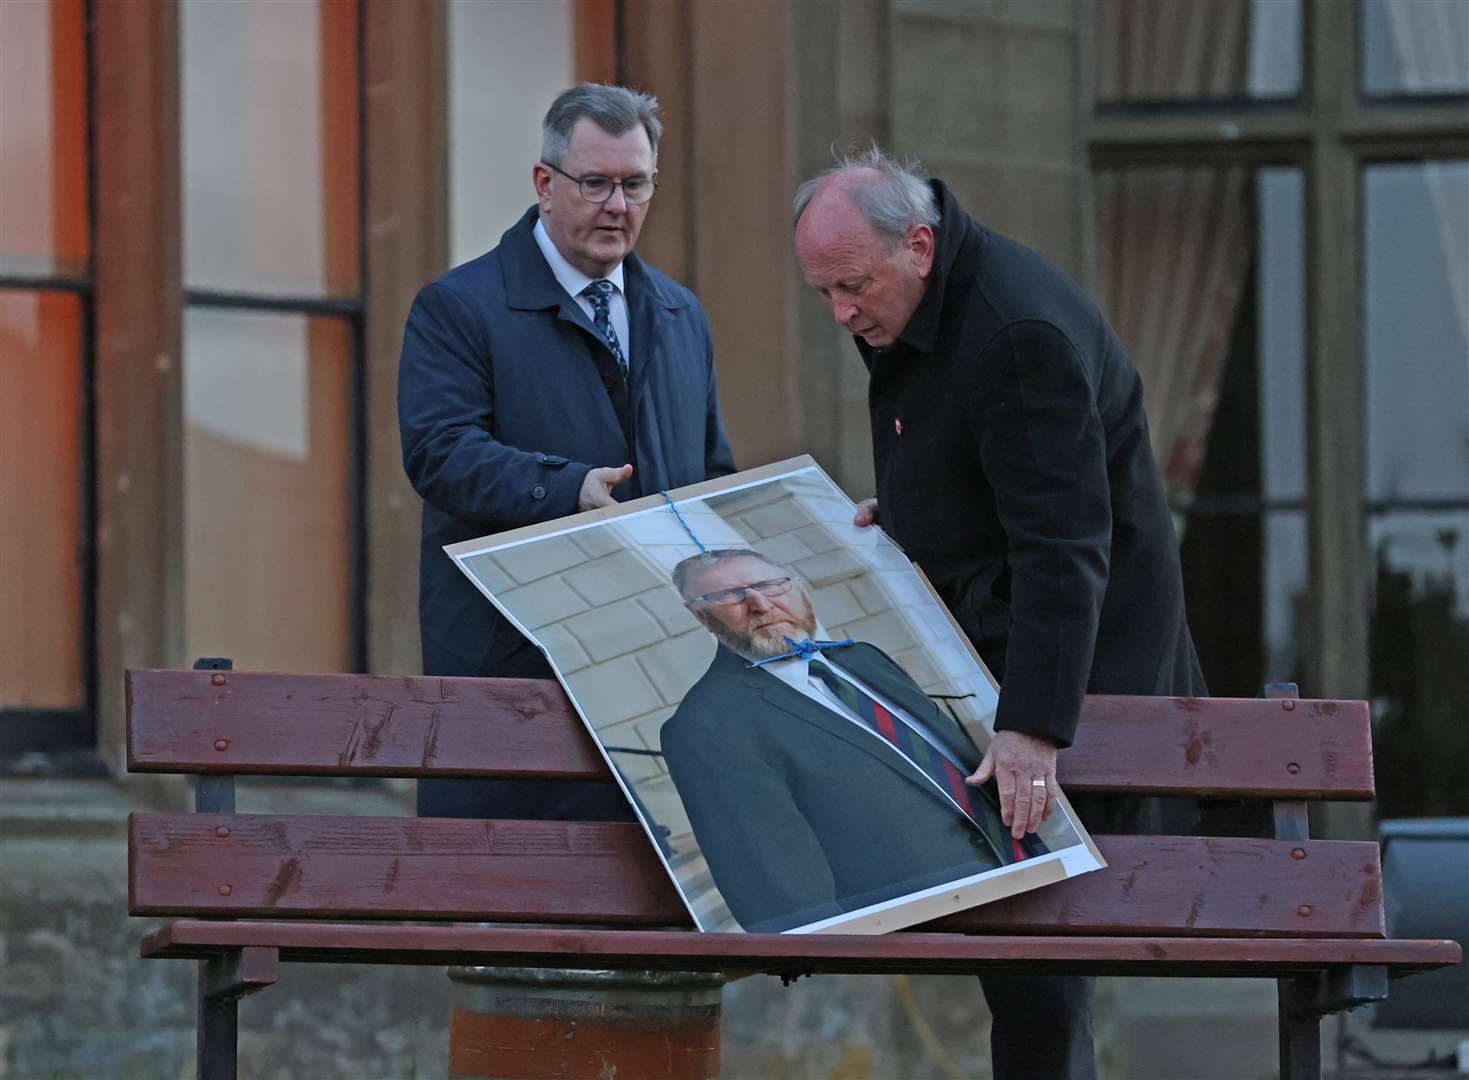 Jim Allister and DUP leader Sir Jeffrey Donaldson remove a poster of the leader of the Ulster Unionist Party, Doug Beattie, with a noose at a rally in Lurgan in April 2022 (PA)